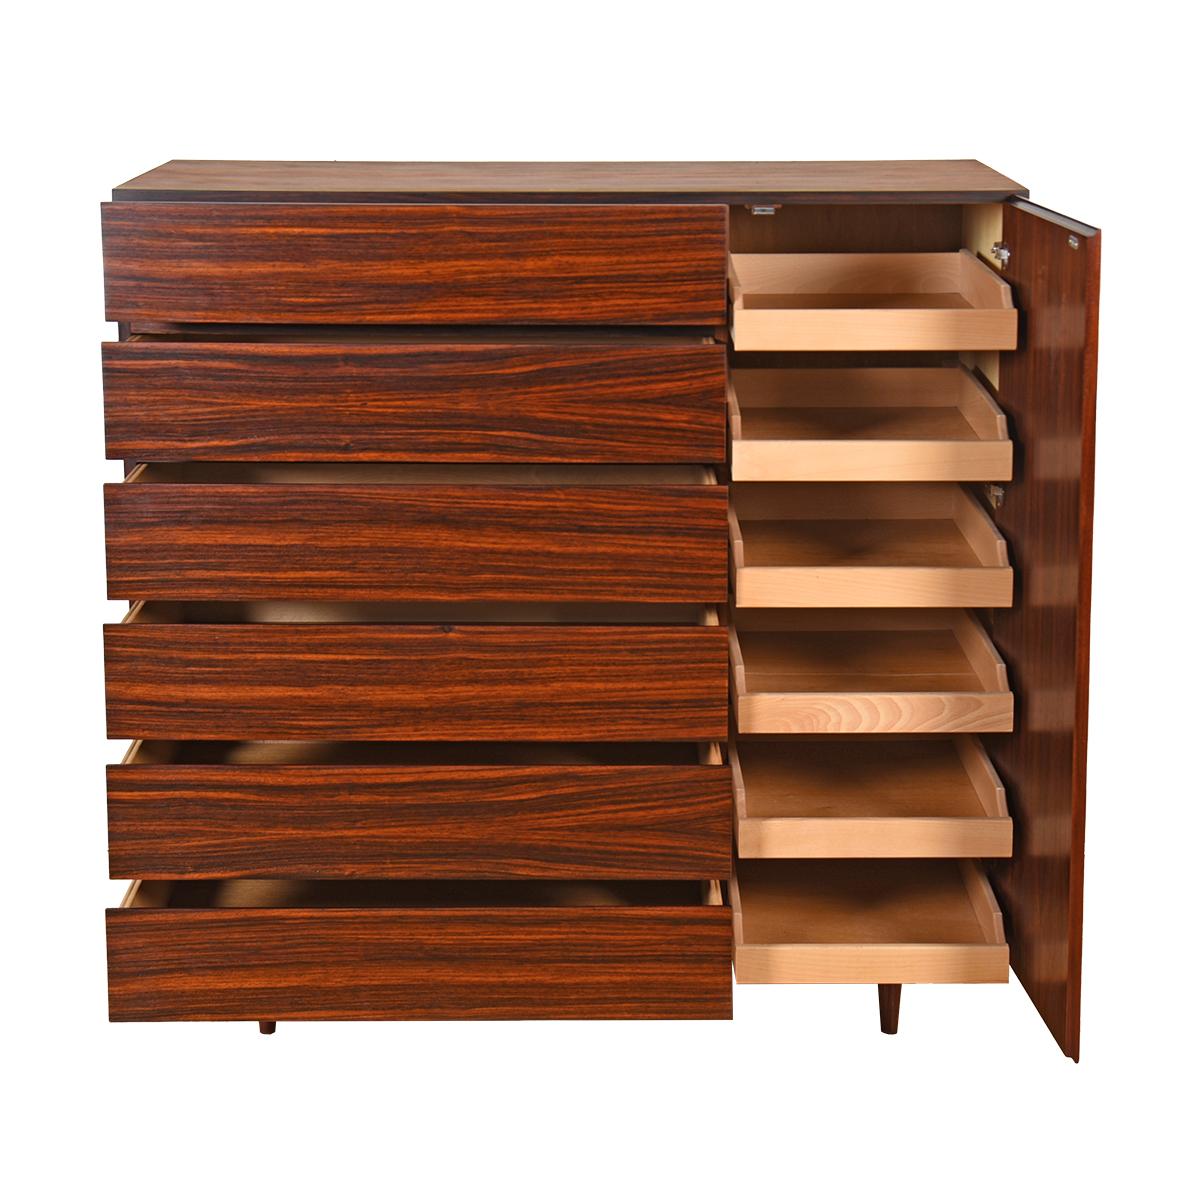 A storage powerhouse, this piece has deep drawers that roll out for your bulkier items and adjustable, shallow drawers for smaller items. The six deep drawers are externally visible while the shallow drawers are hidden behind a door. Gracious Danish